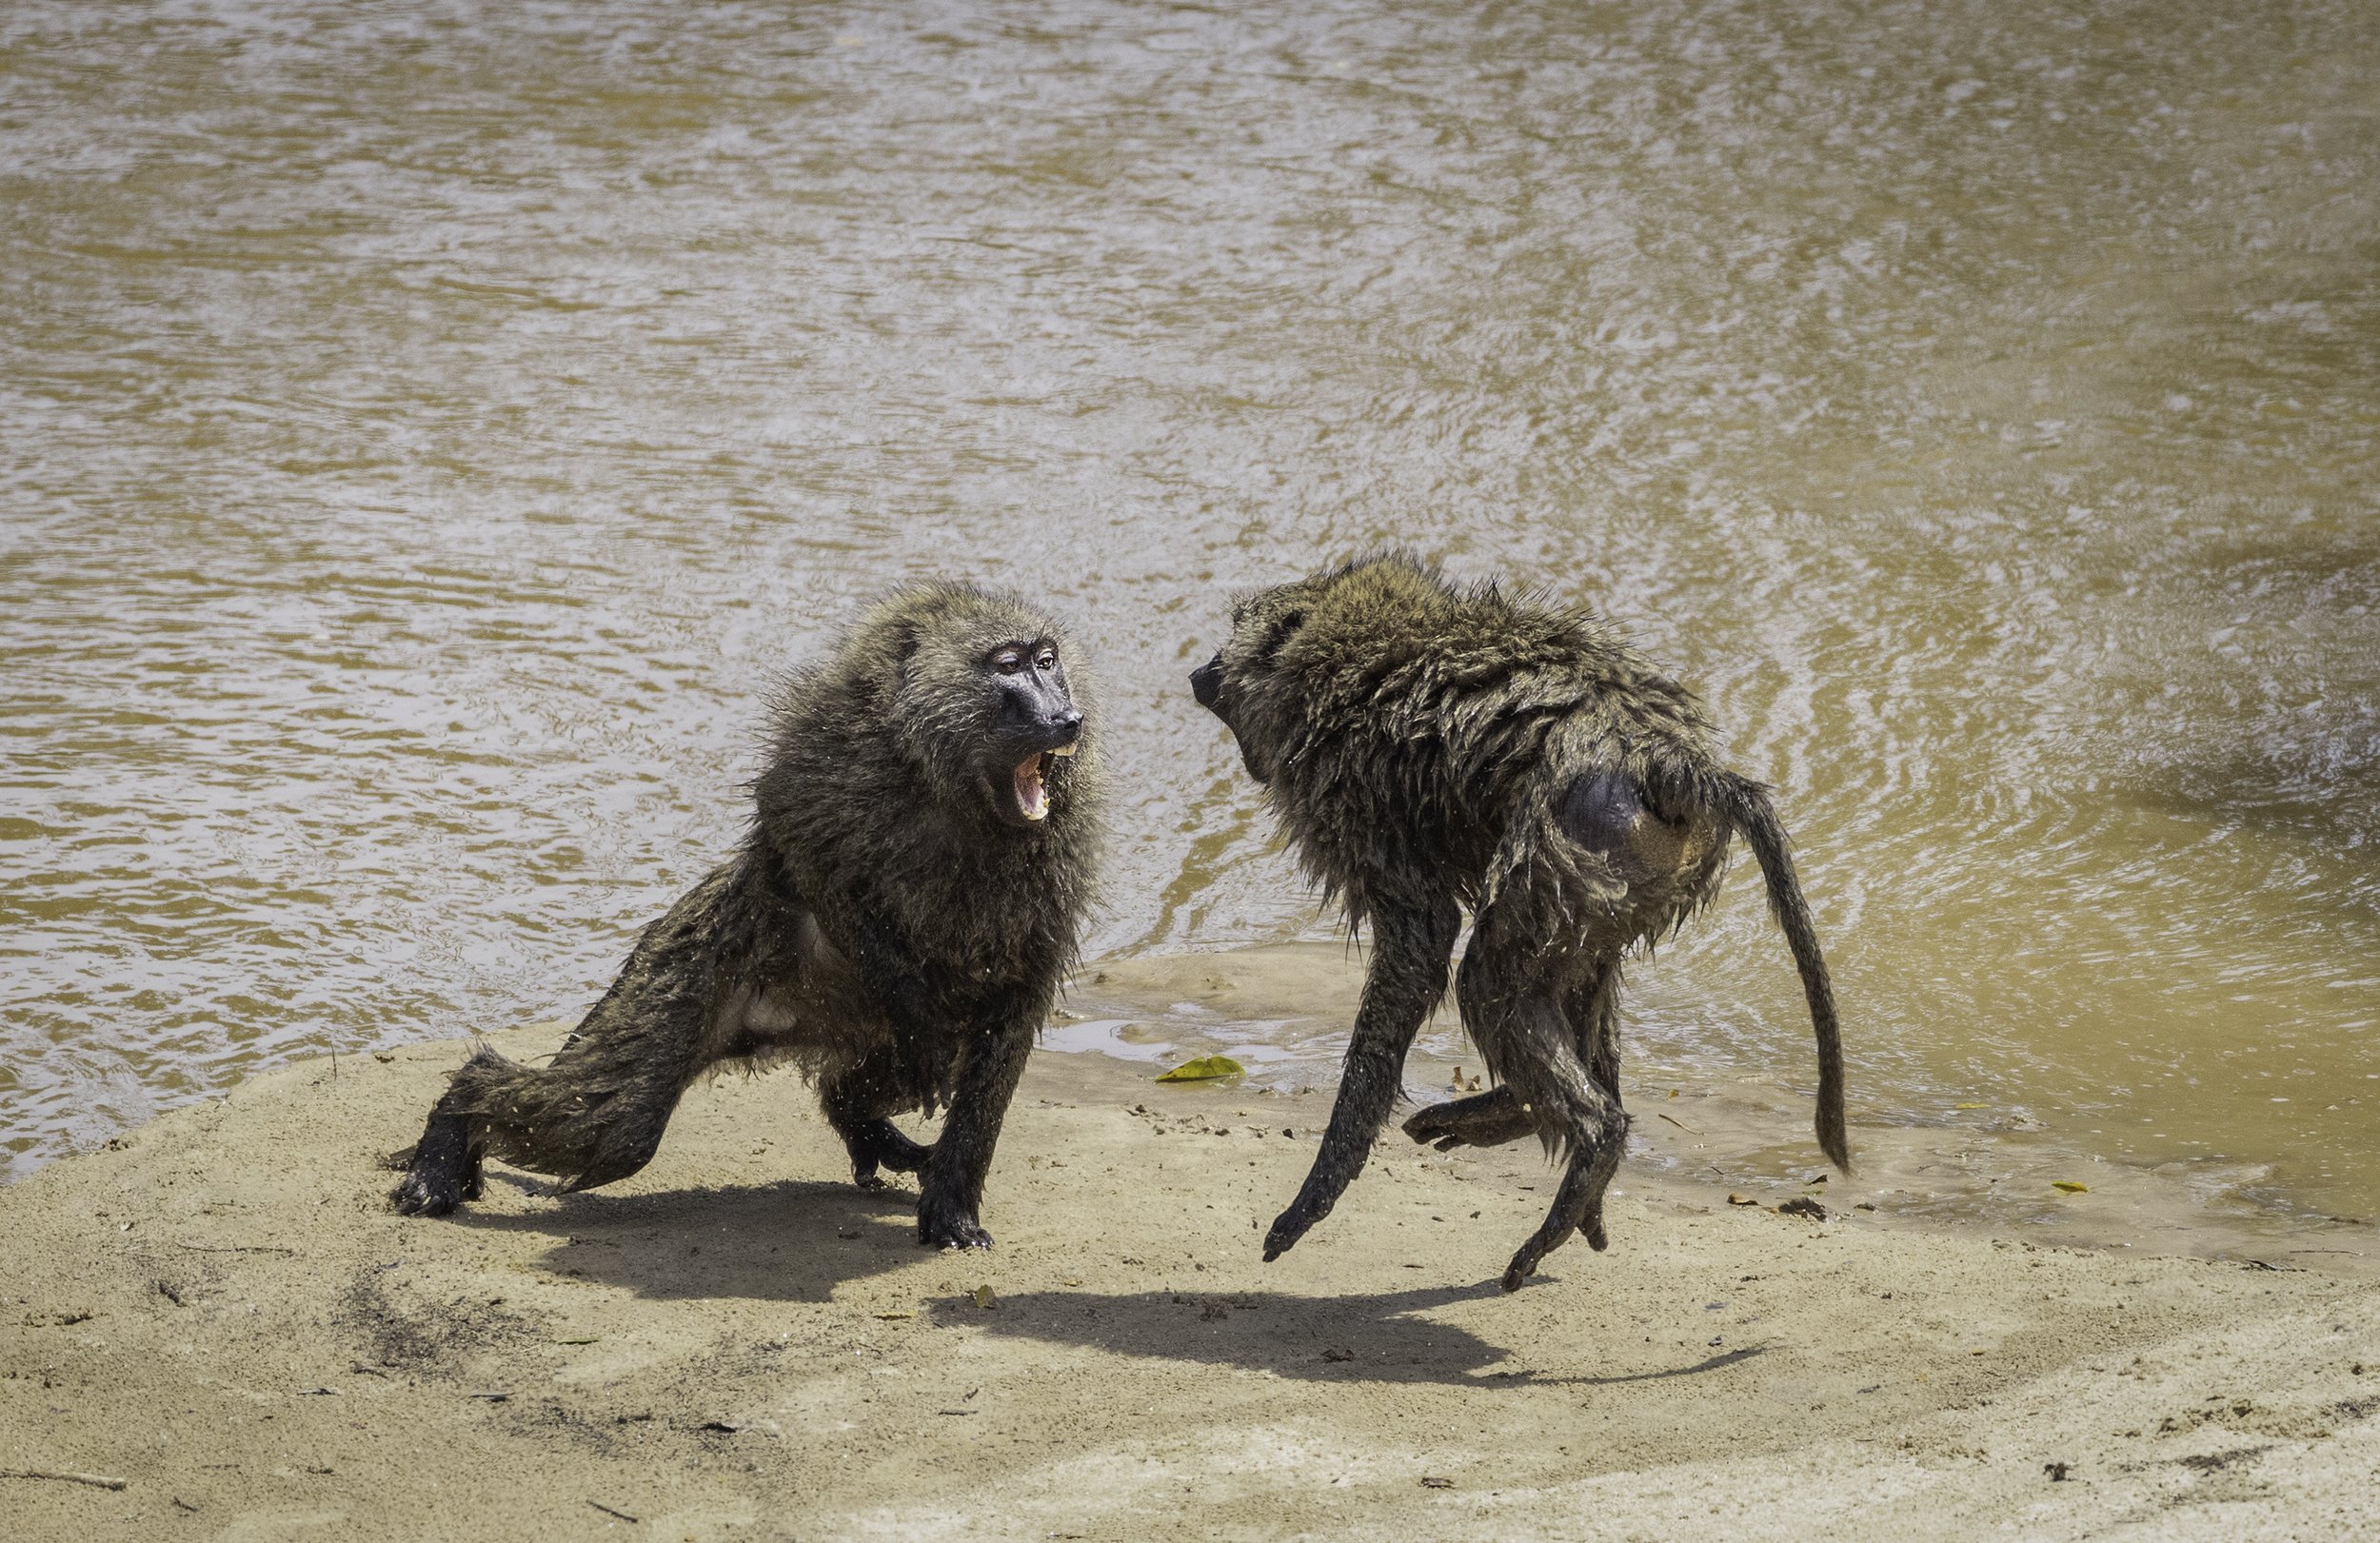 Baboons play fighting